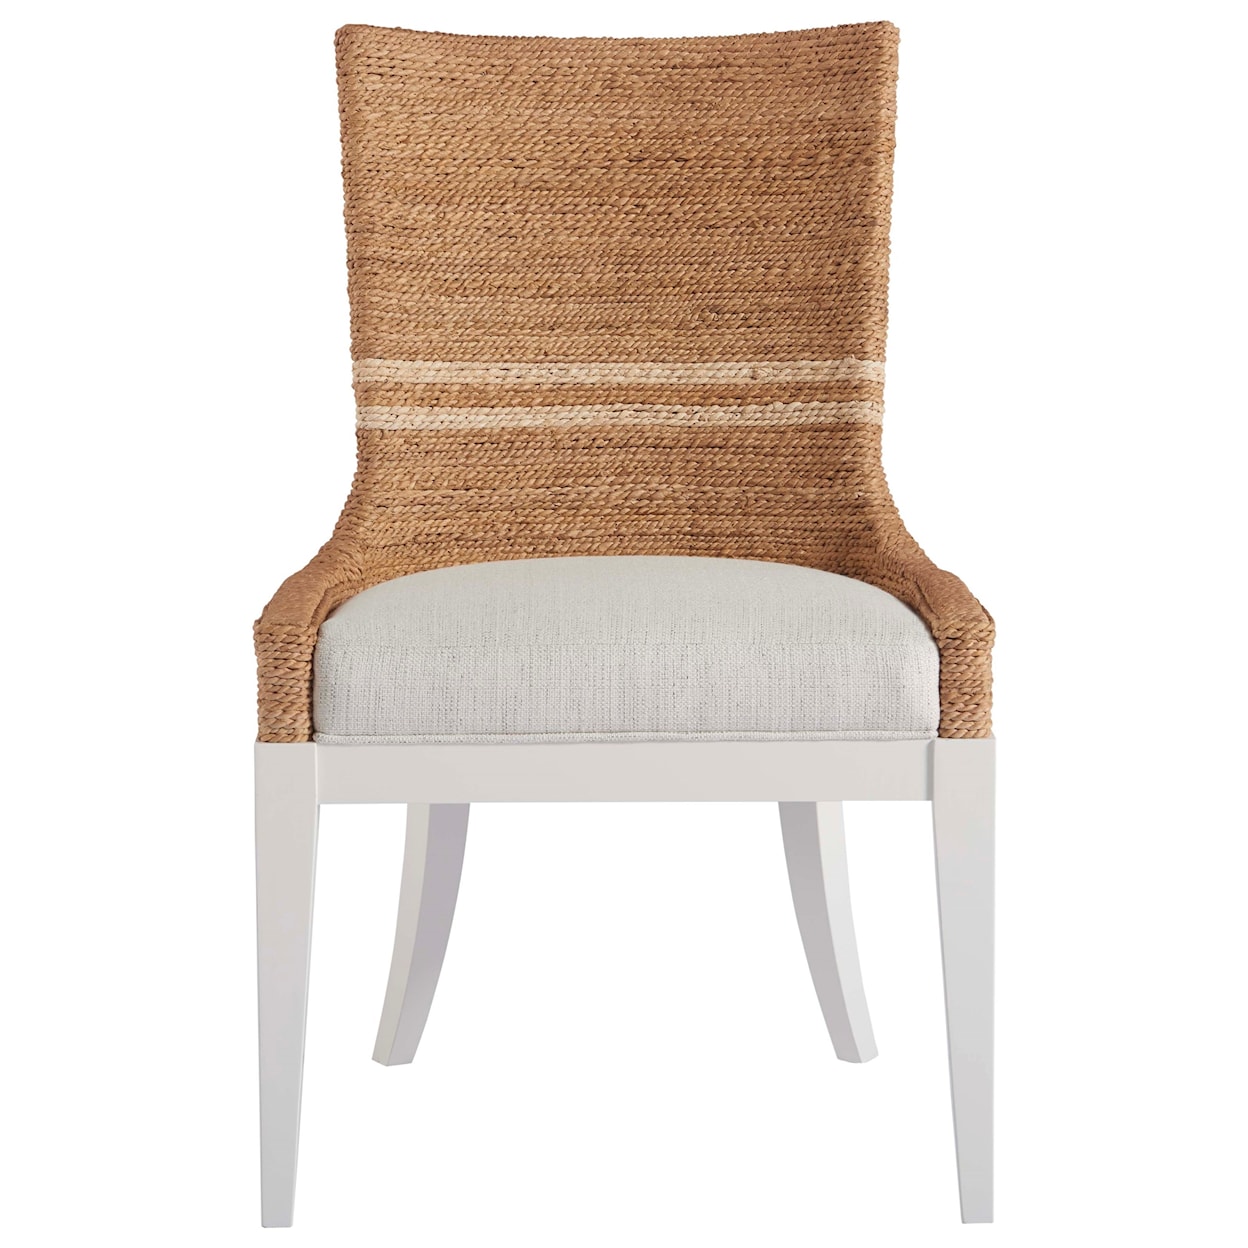 Universal Escape-Coastal Living Home Collection Siesta Key Dining Chair